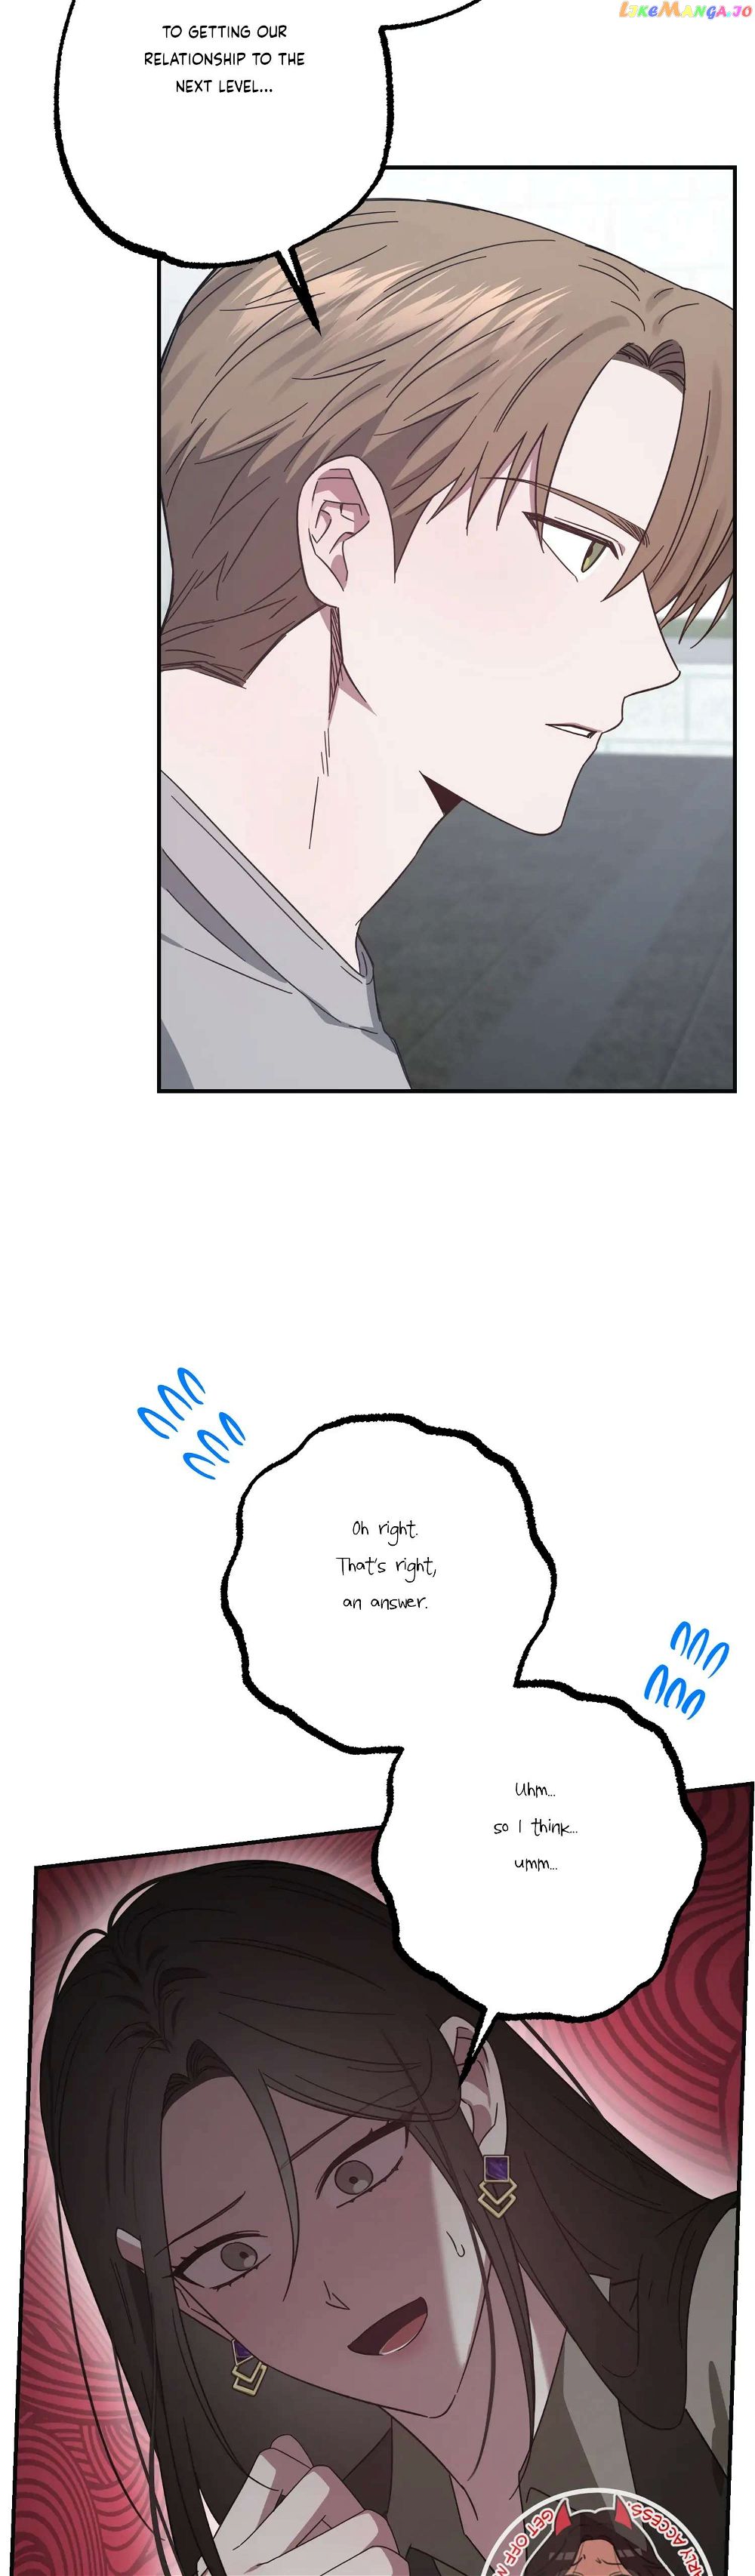 Mijeong’s Relationships chapter 39 - Page 26